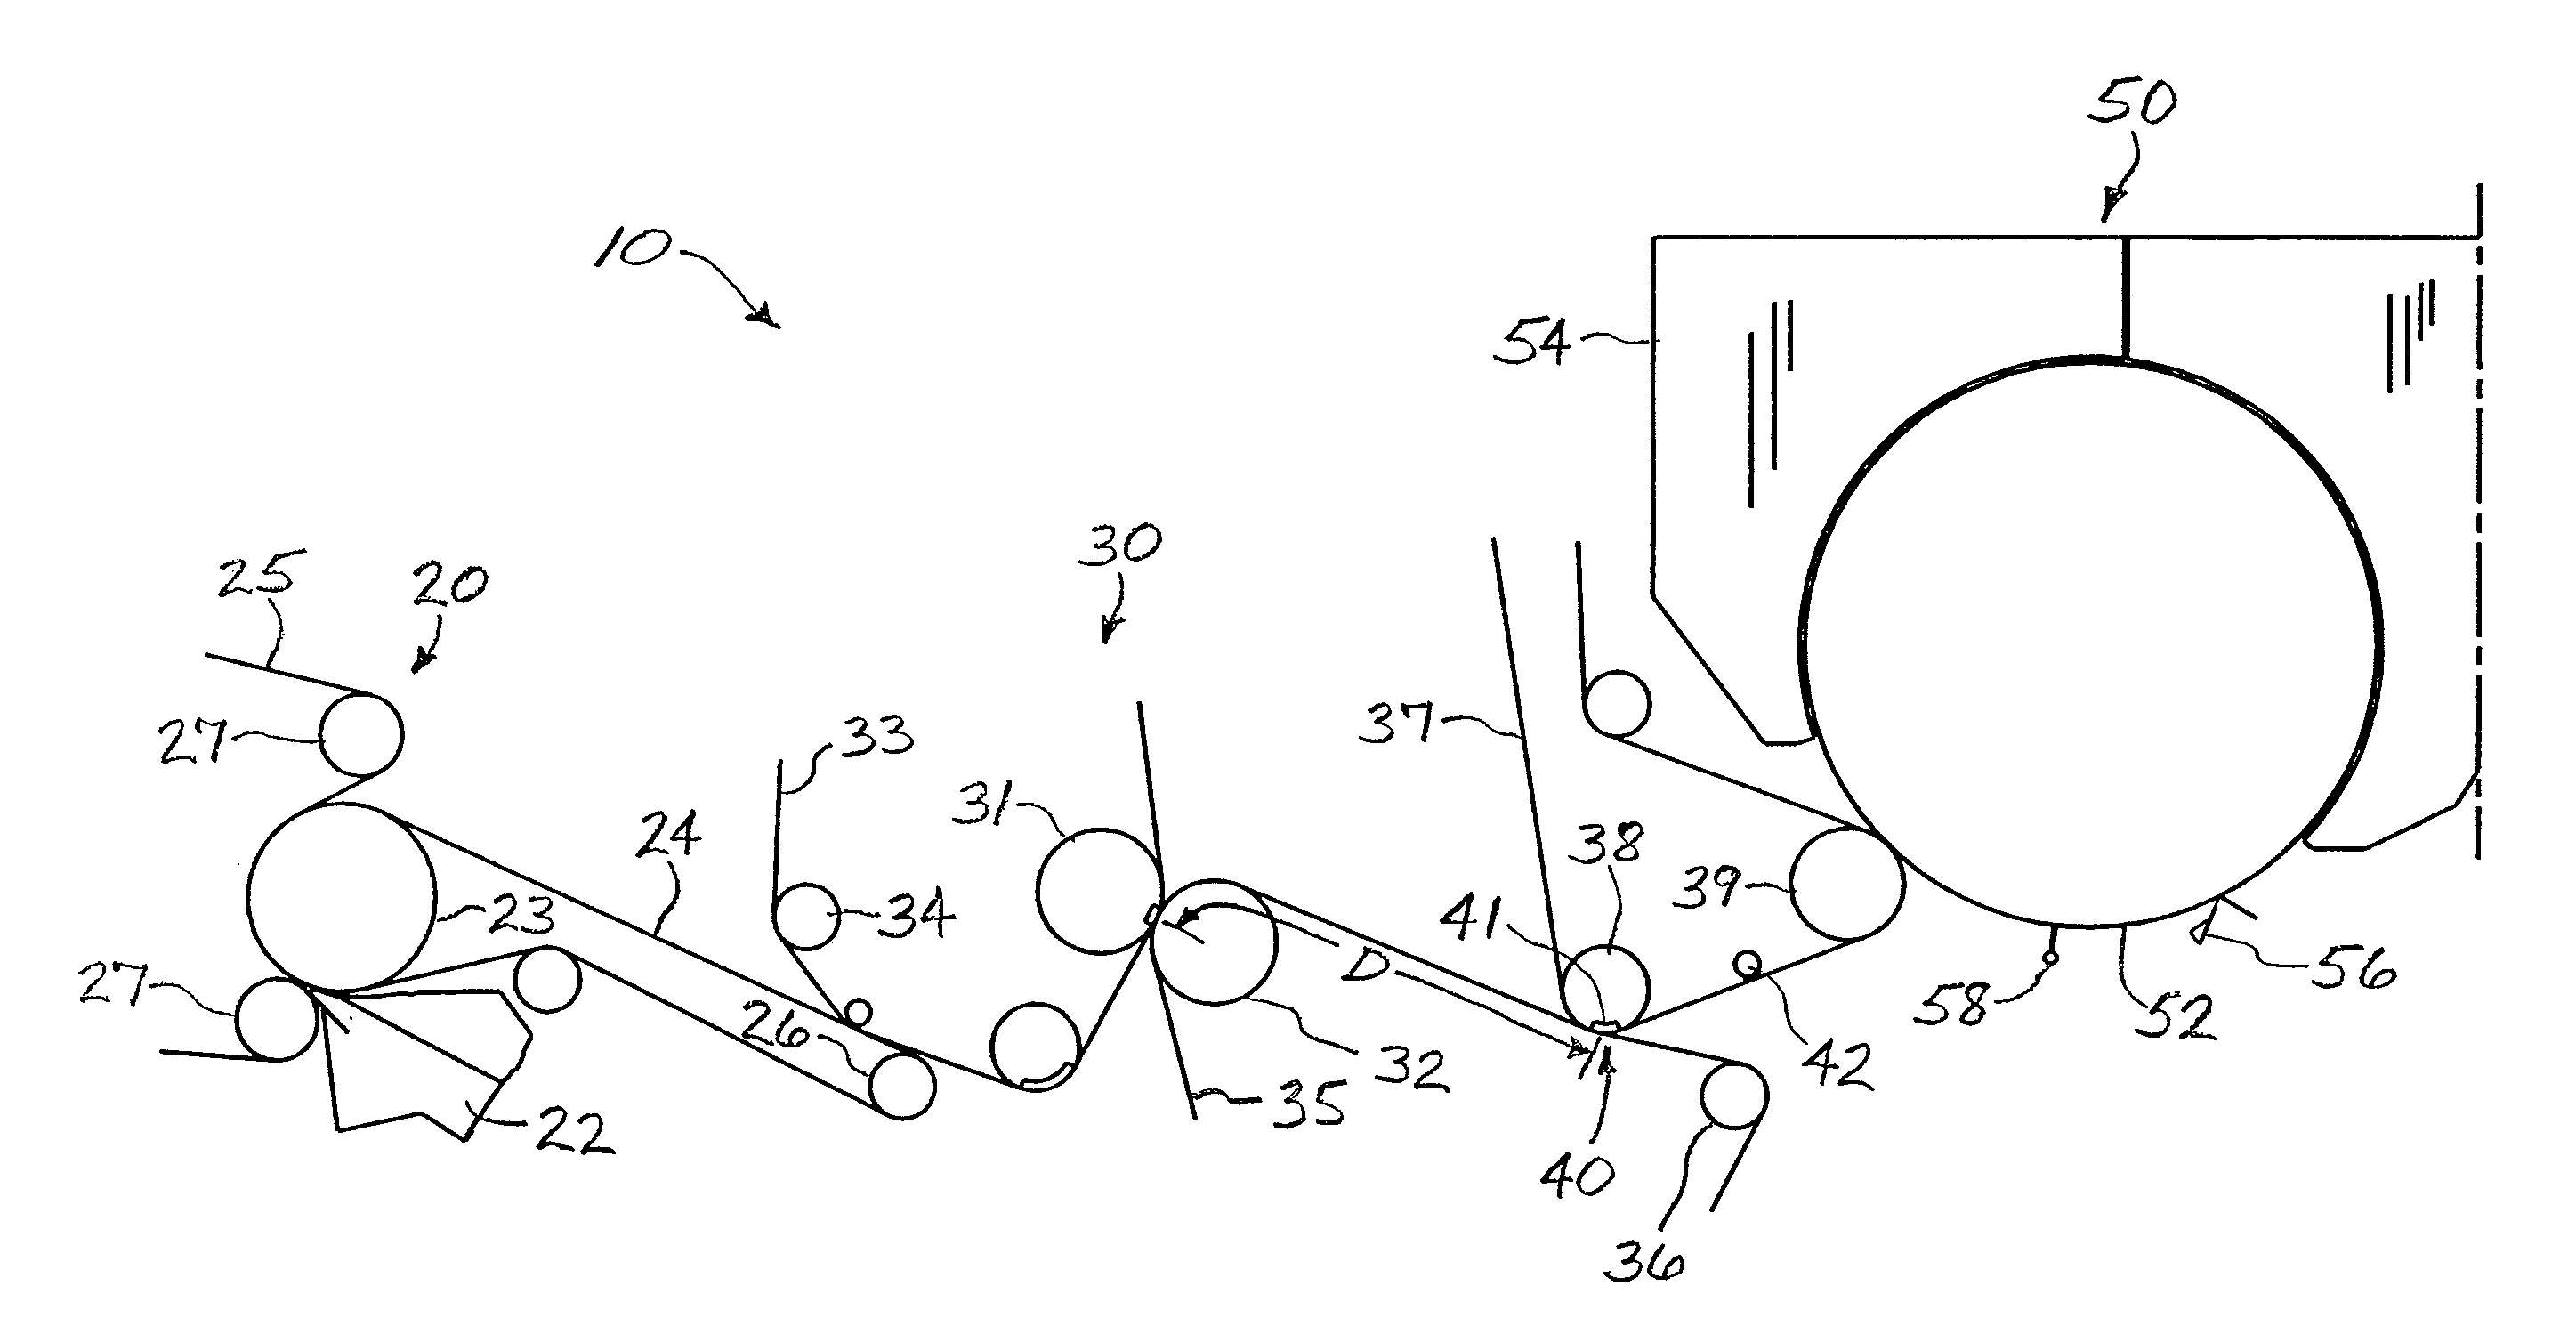 Papermaking Machine Employing an Impermeable Transfer Belt, and Associated Methods